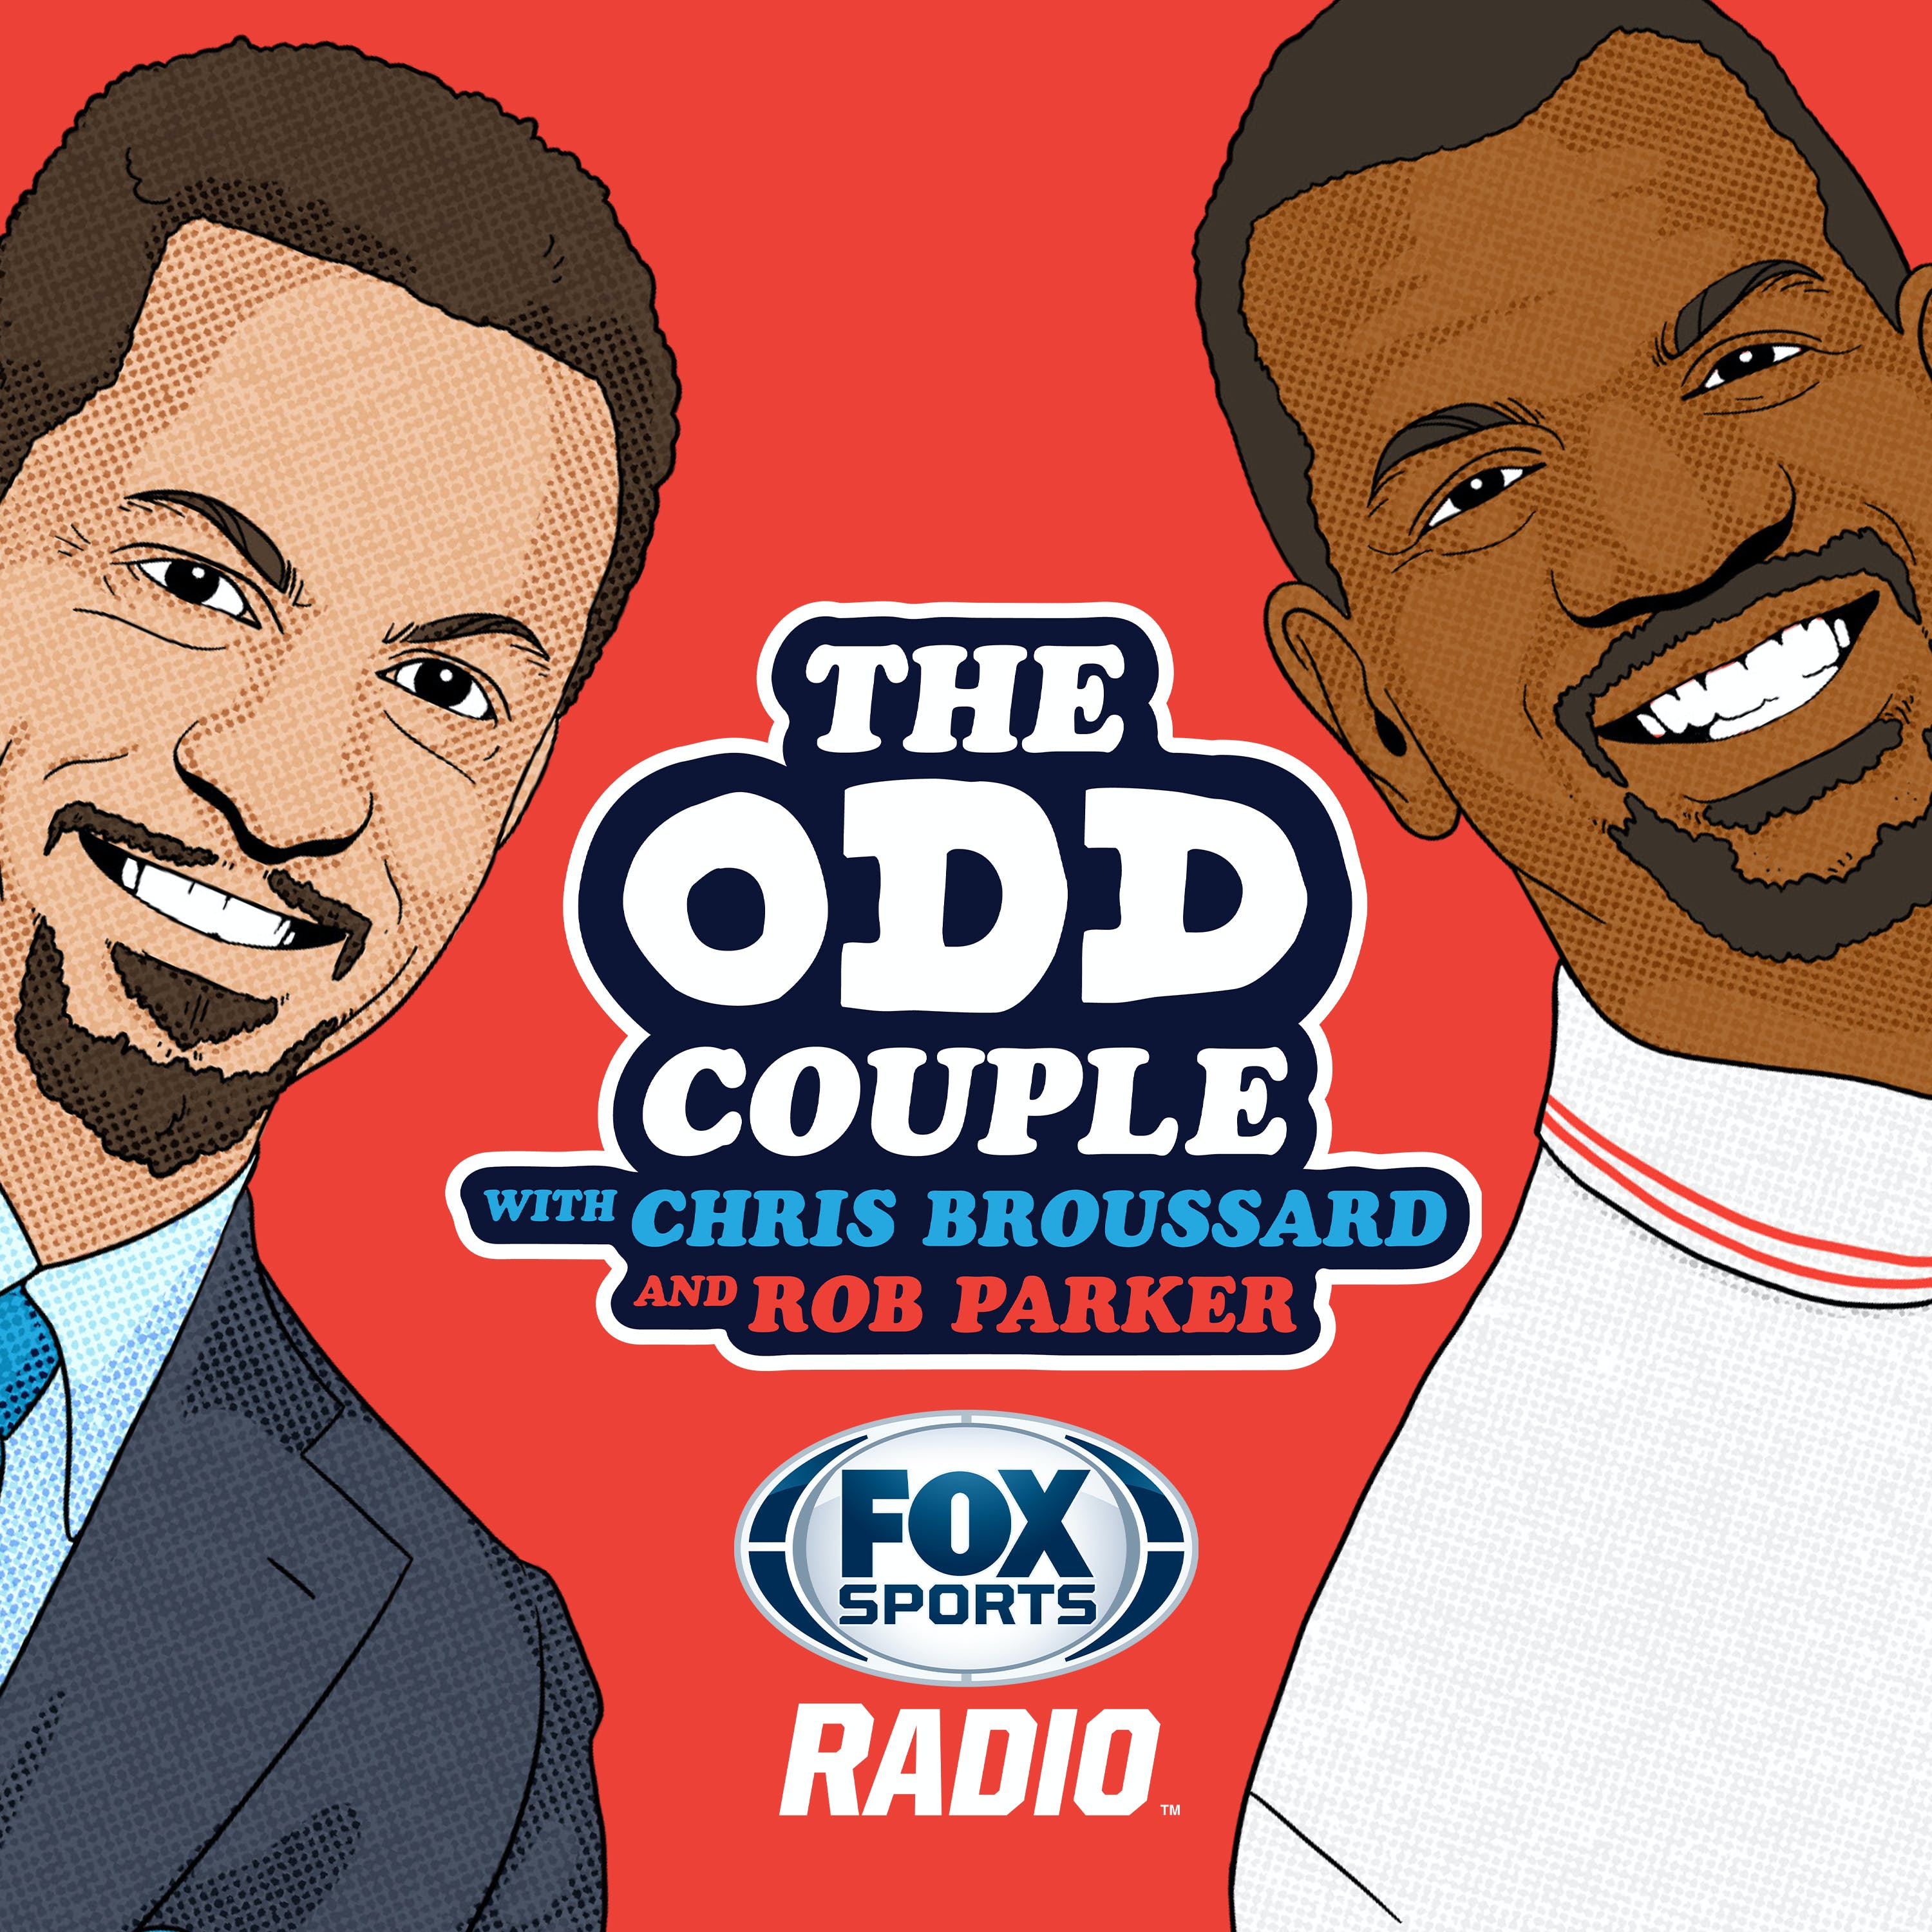 04/19/2022 - Best of The Odd Couple